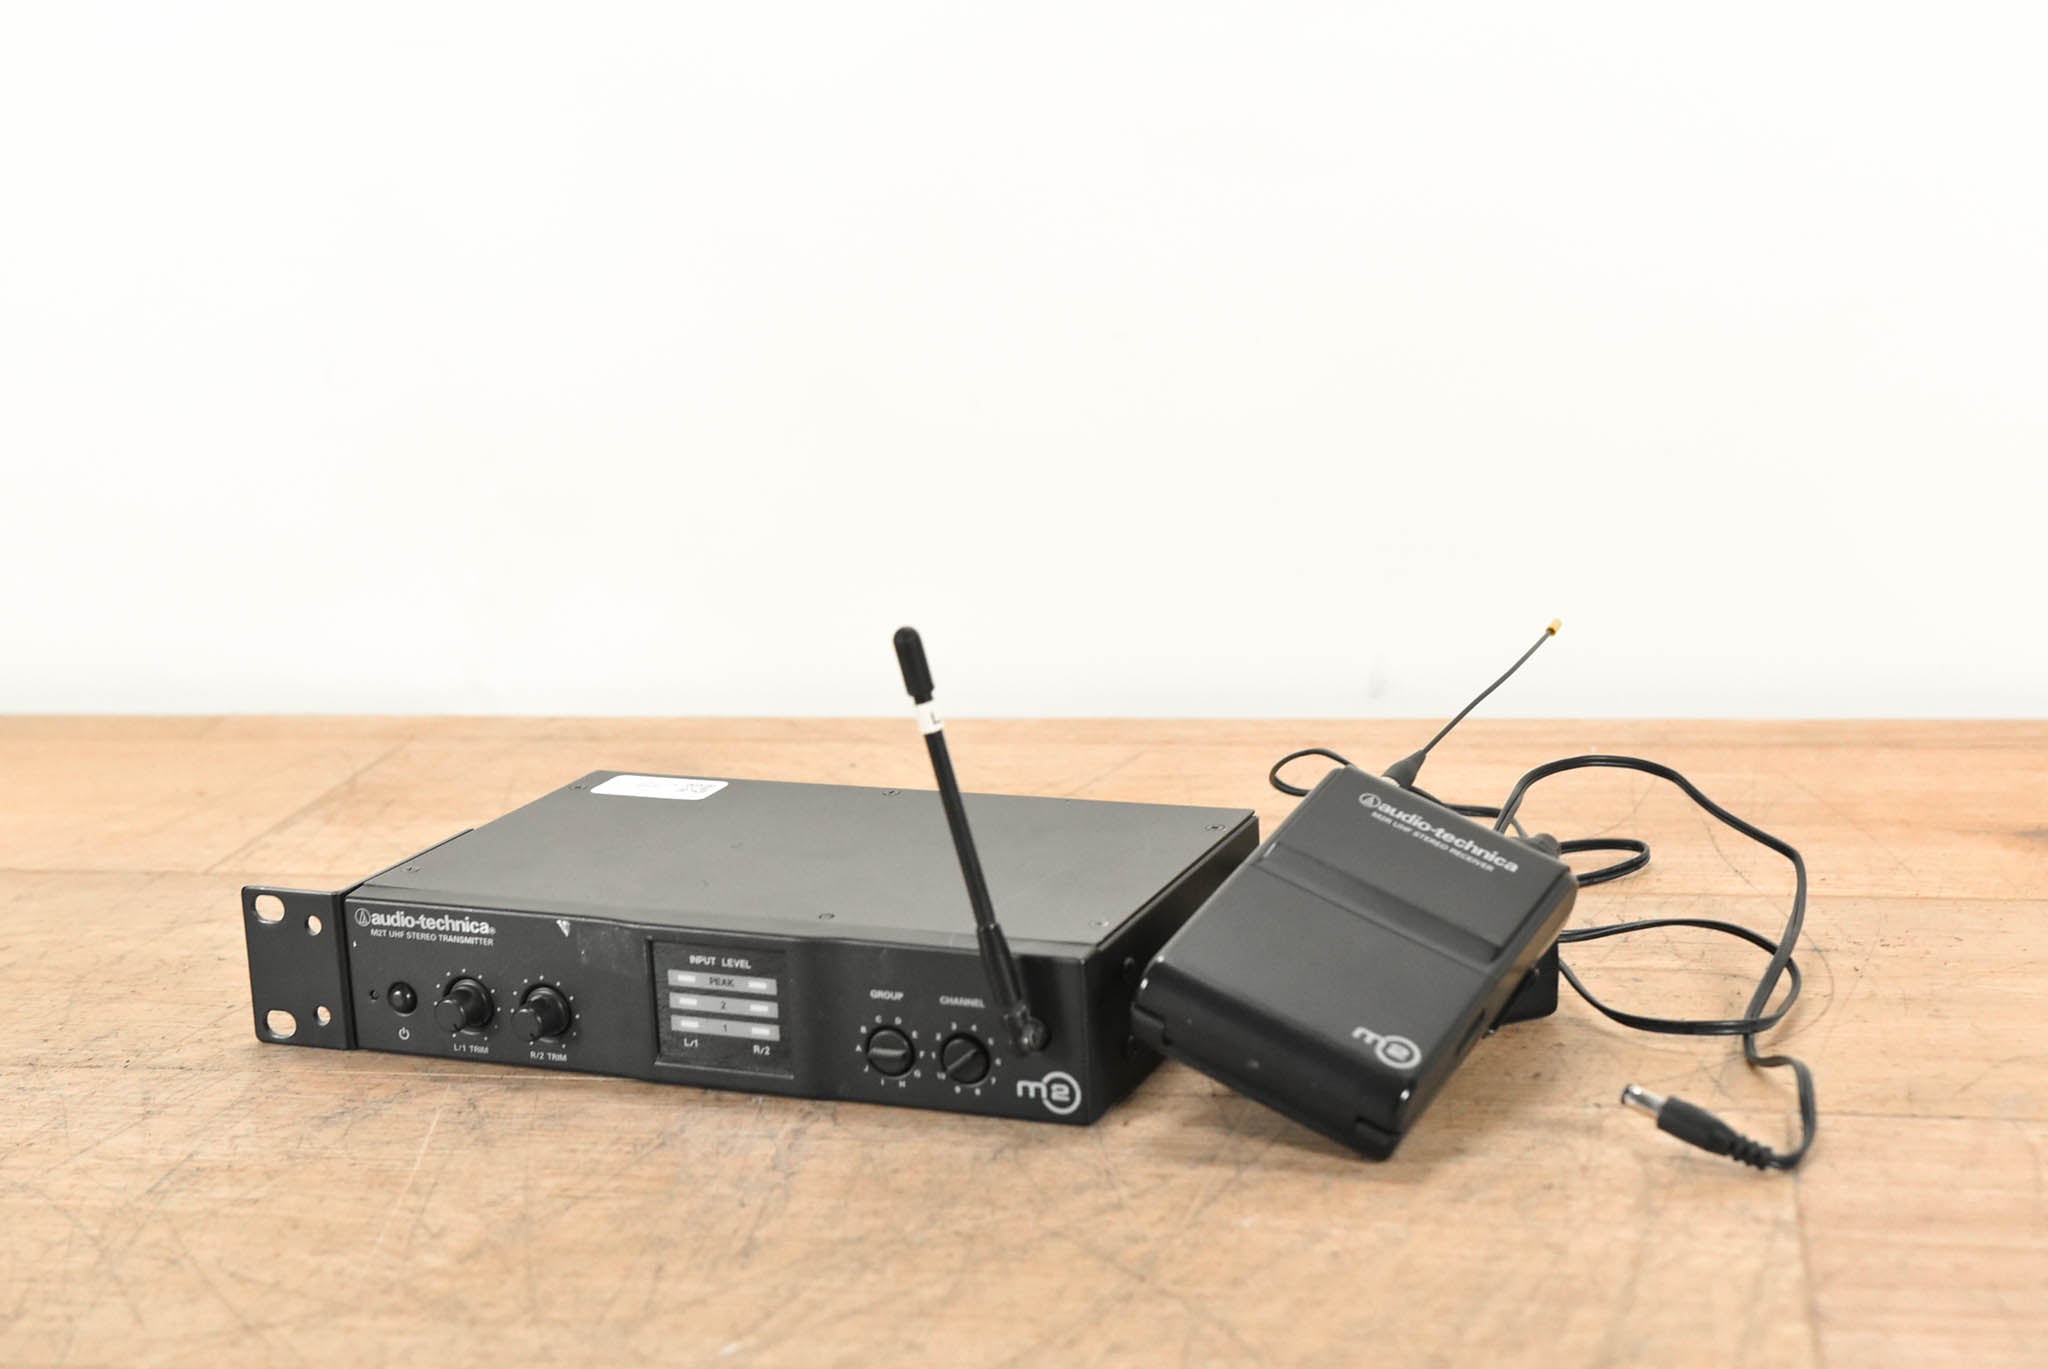 Audio-Technica M2 Wireless In-Ear Monitor System - 575-608 MHz